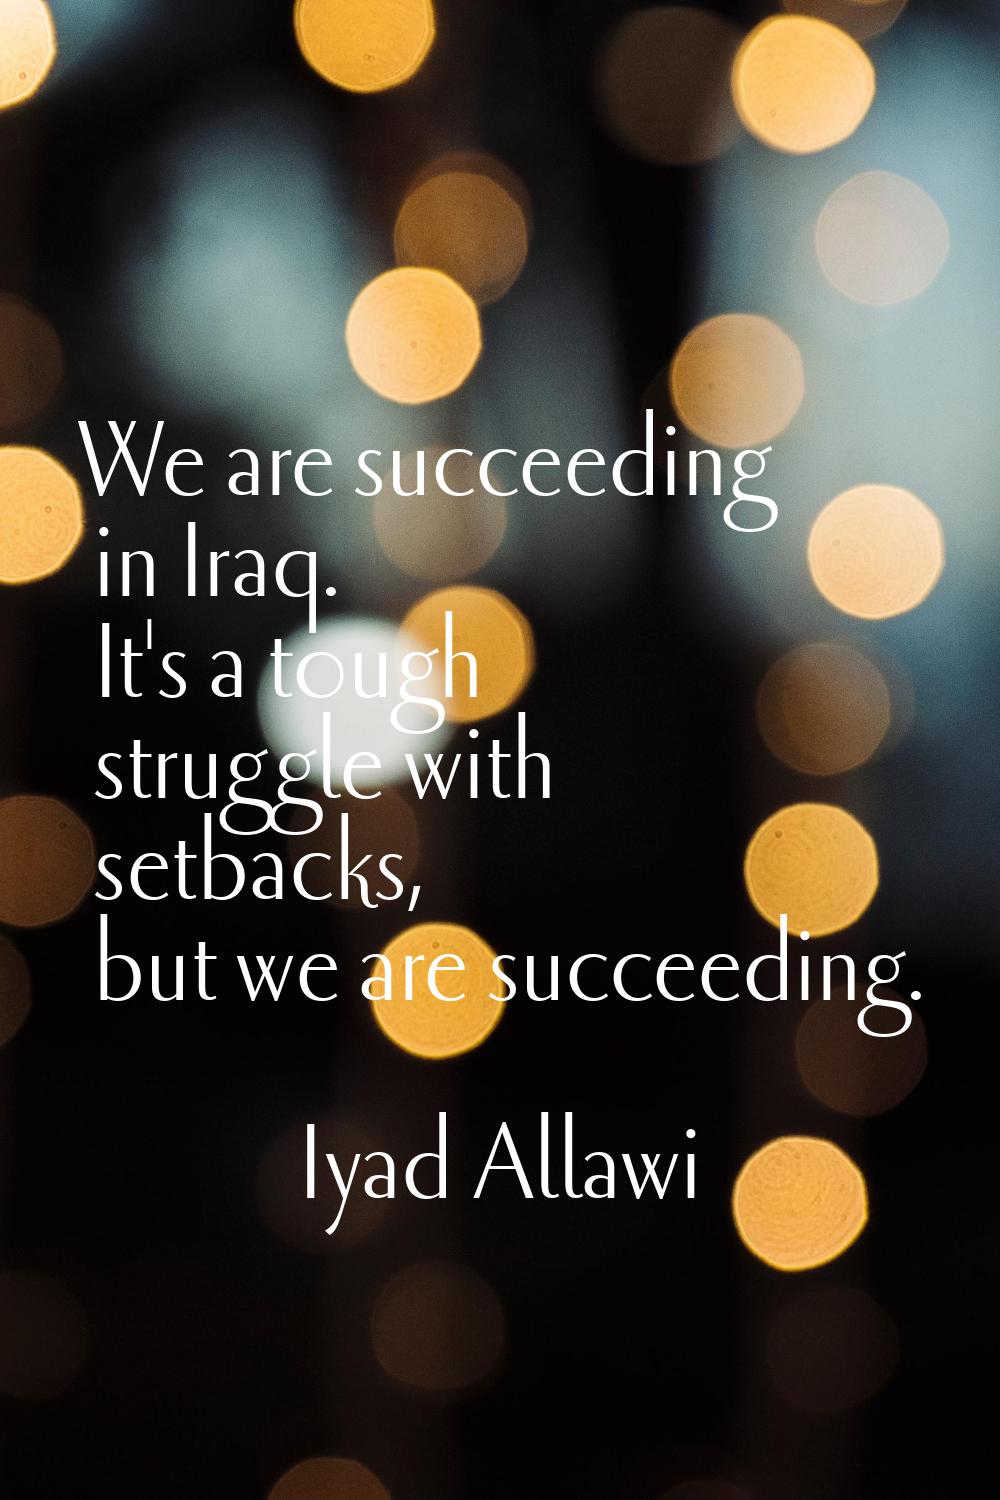 We are succeeding in Iraq. It's a tough struggle with setbacks, but we are succeeding.